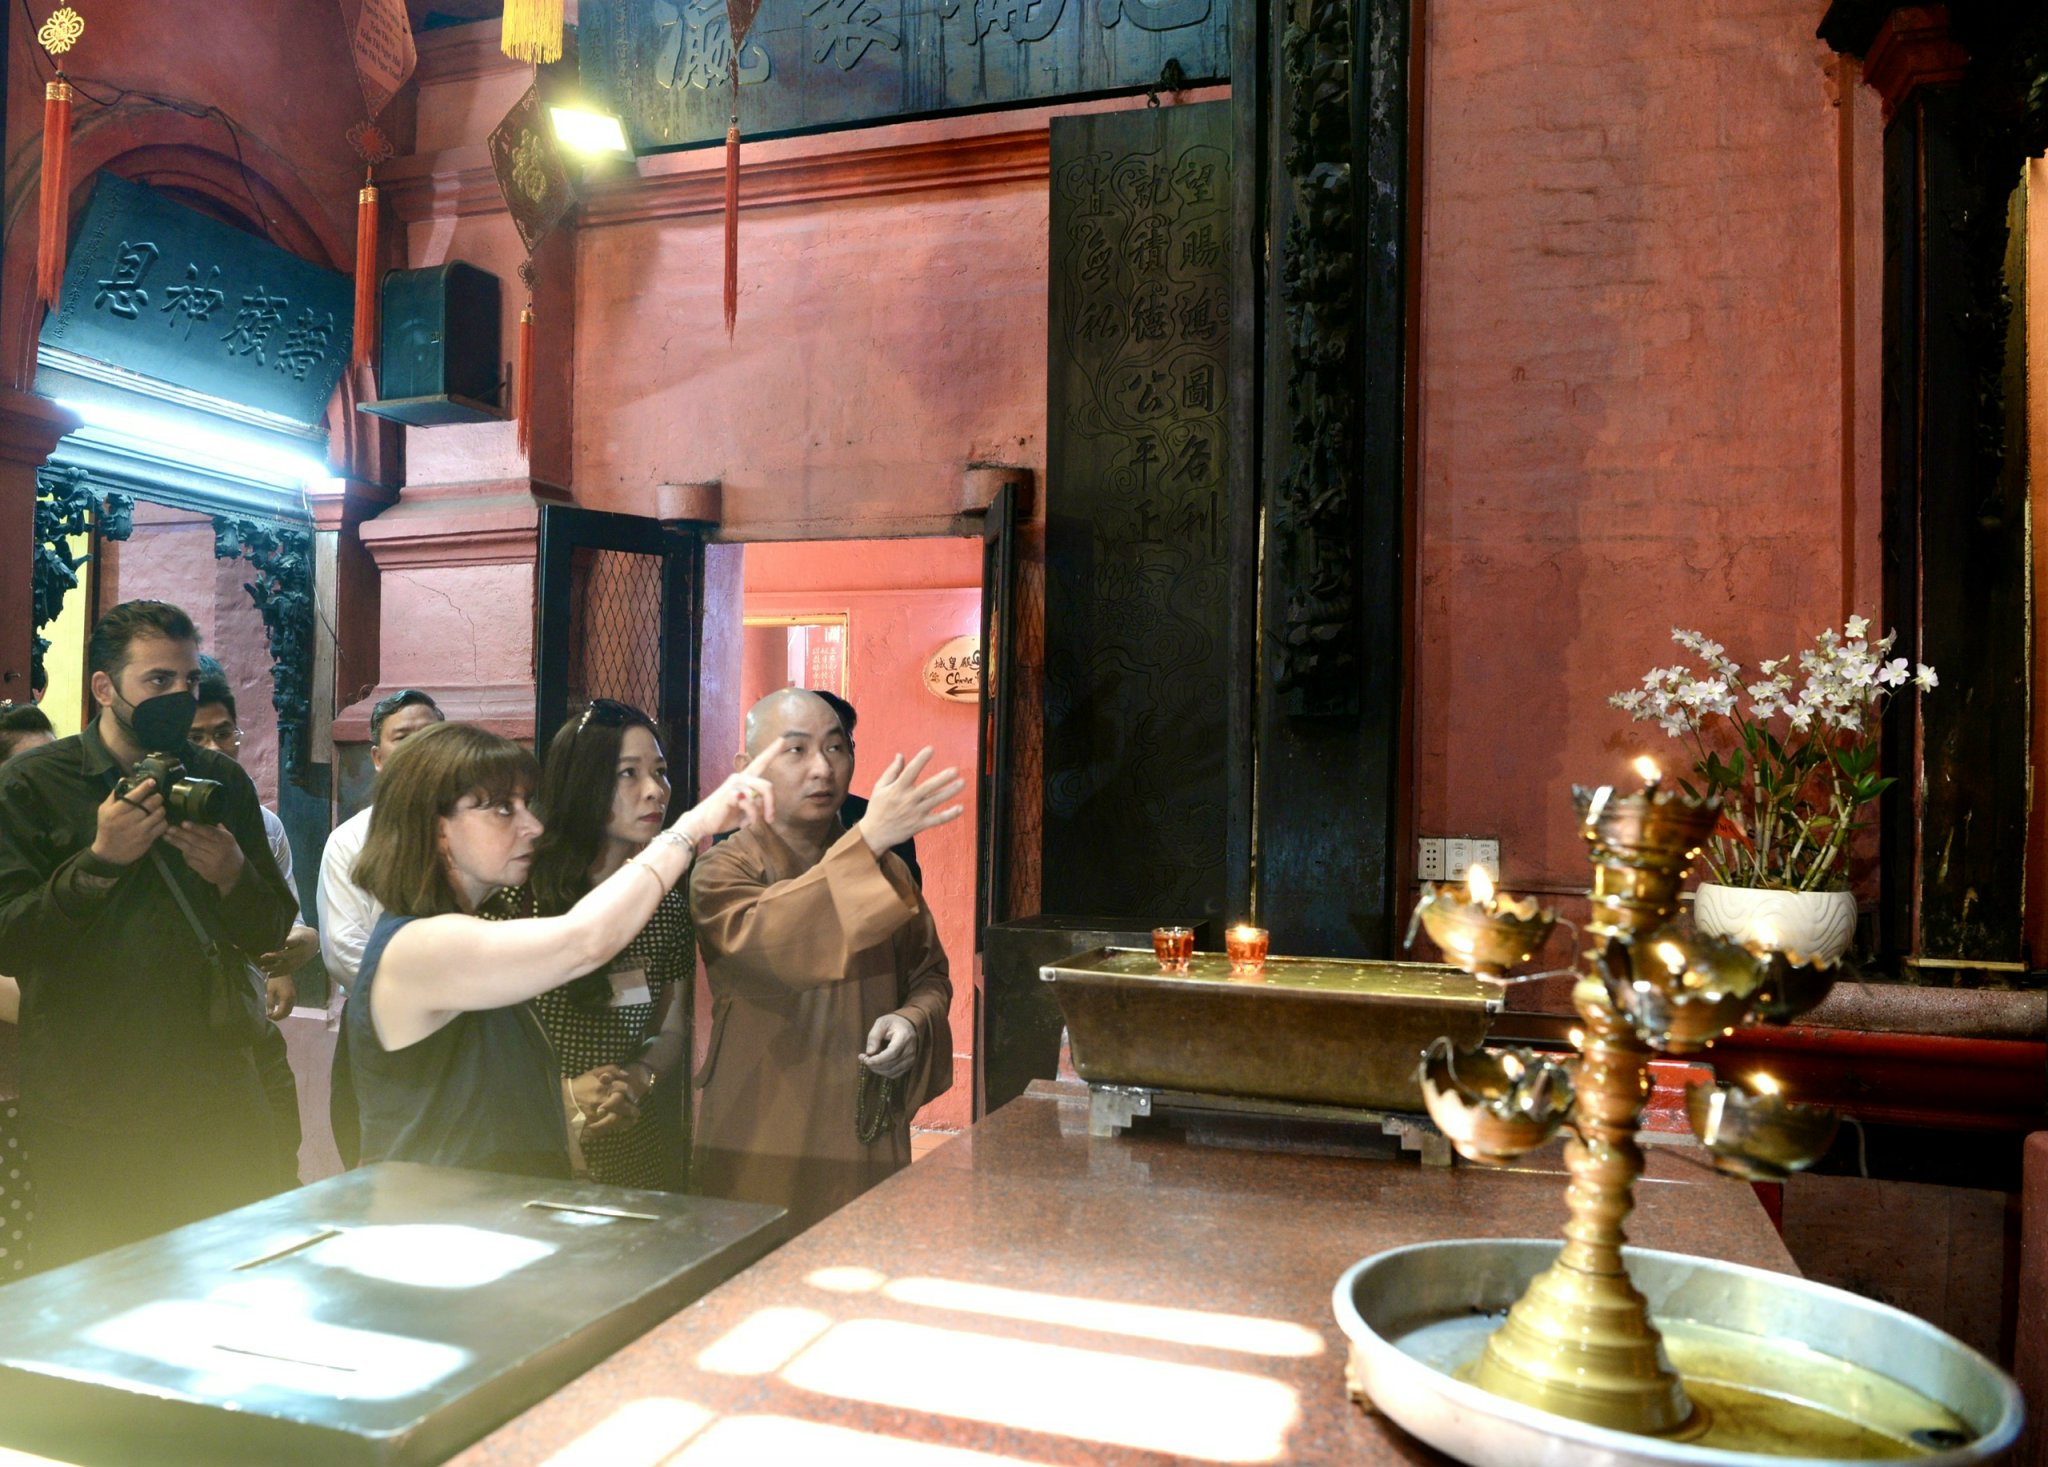 Greek President Katerina Sakellaropoulou asks a monk about the stories behind the statues at Ngoc Hoang Pagoda in District 1, Ho Chi Minh City, May 19, 2022. Photo: T.T.D. / Tuoi Tre